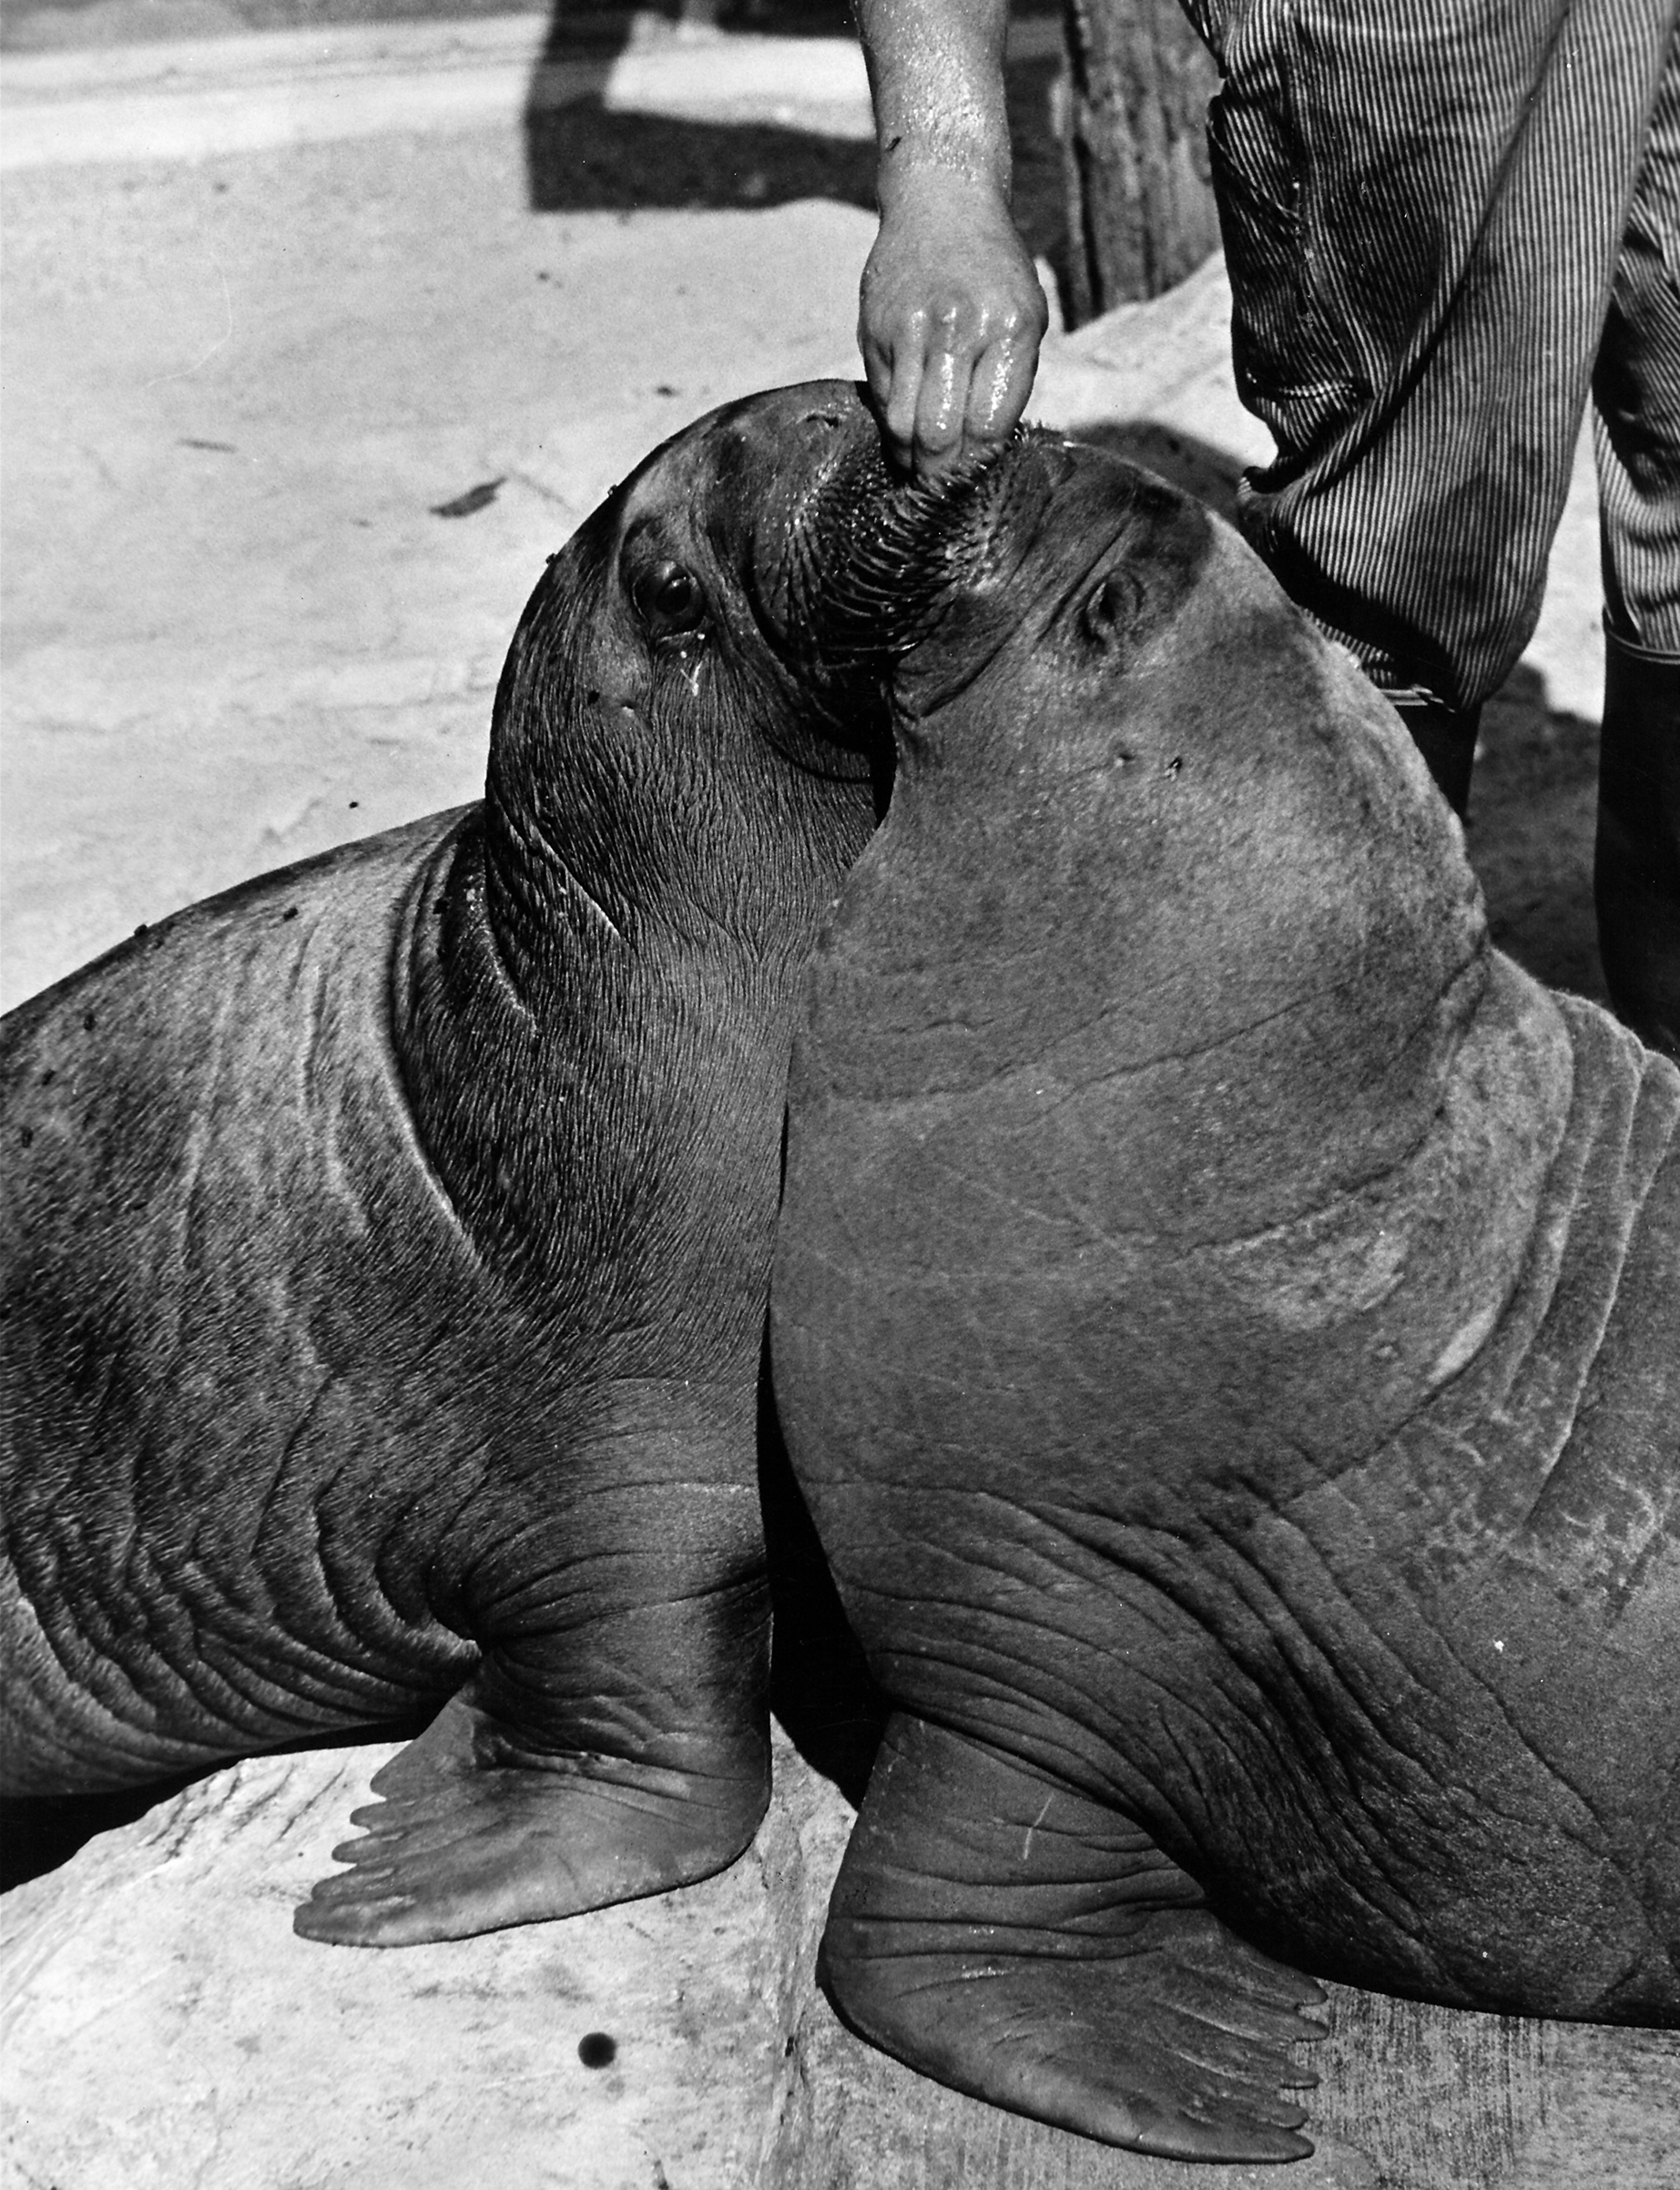 Two walruses kissing as they eat from a hand between them at the Brookfield zoo, 1938.